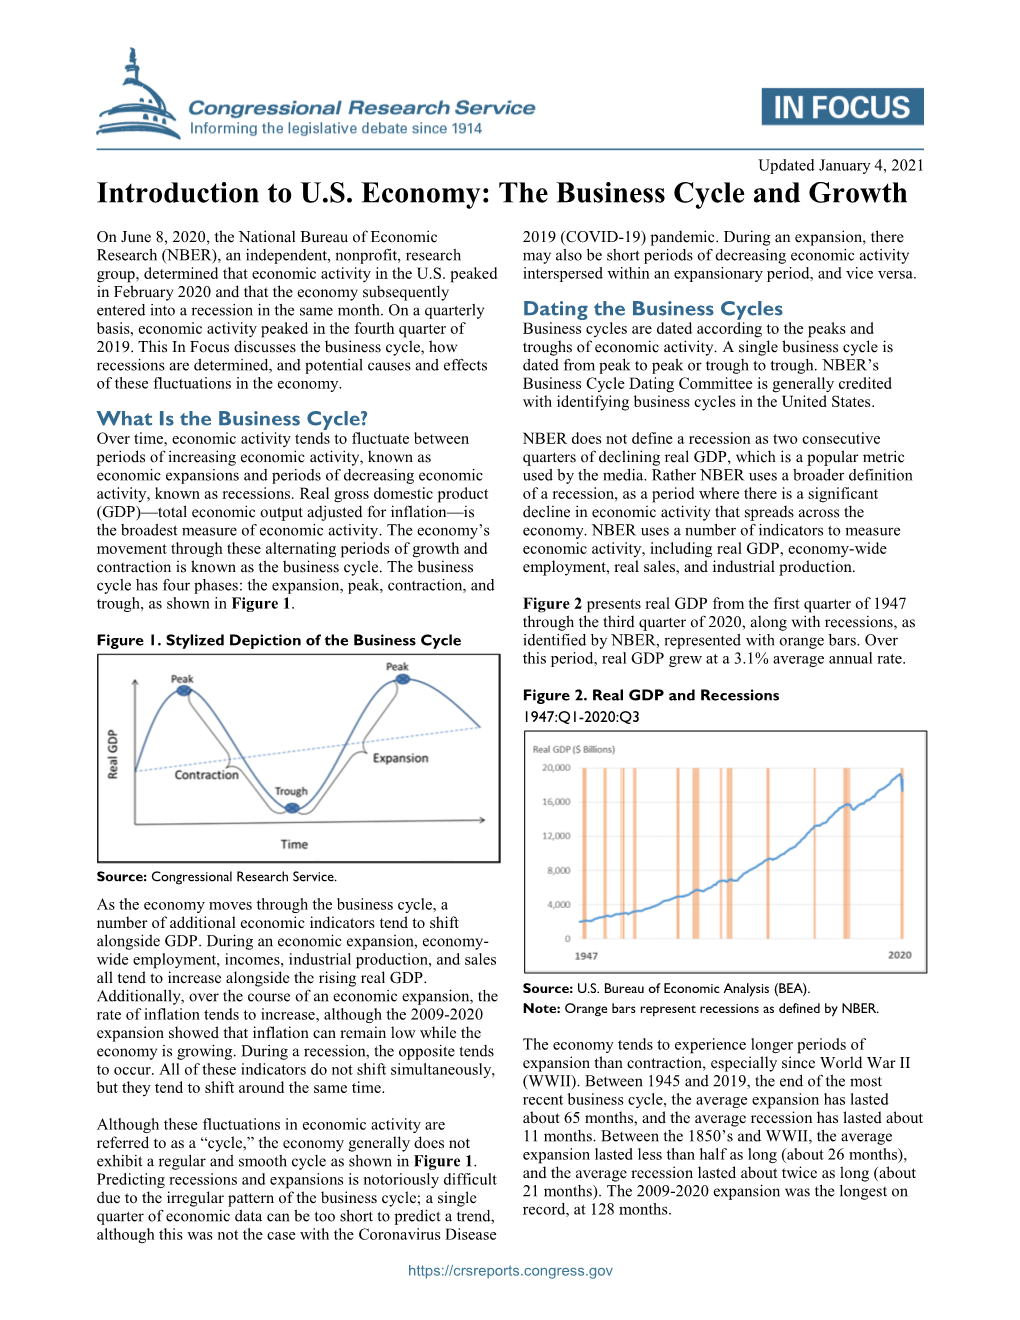 The Business Cycle and Growth